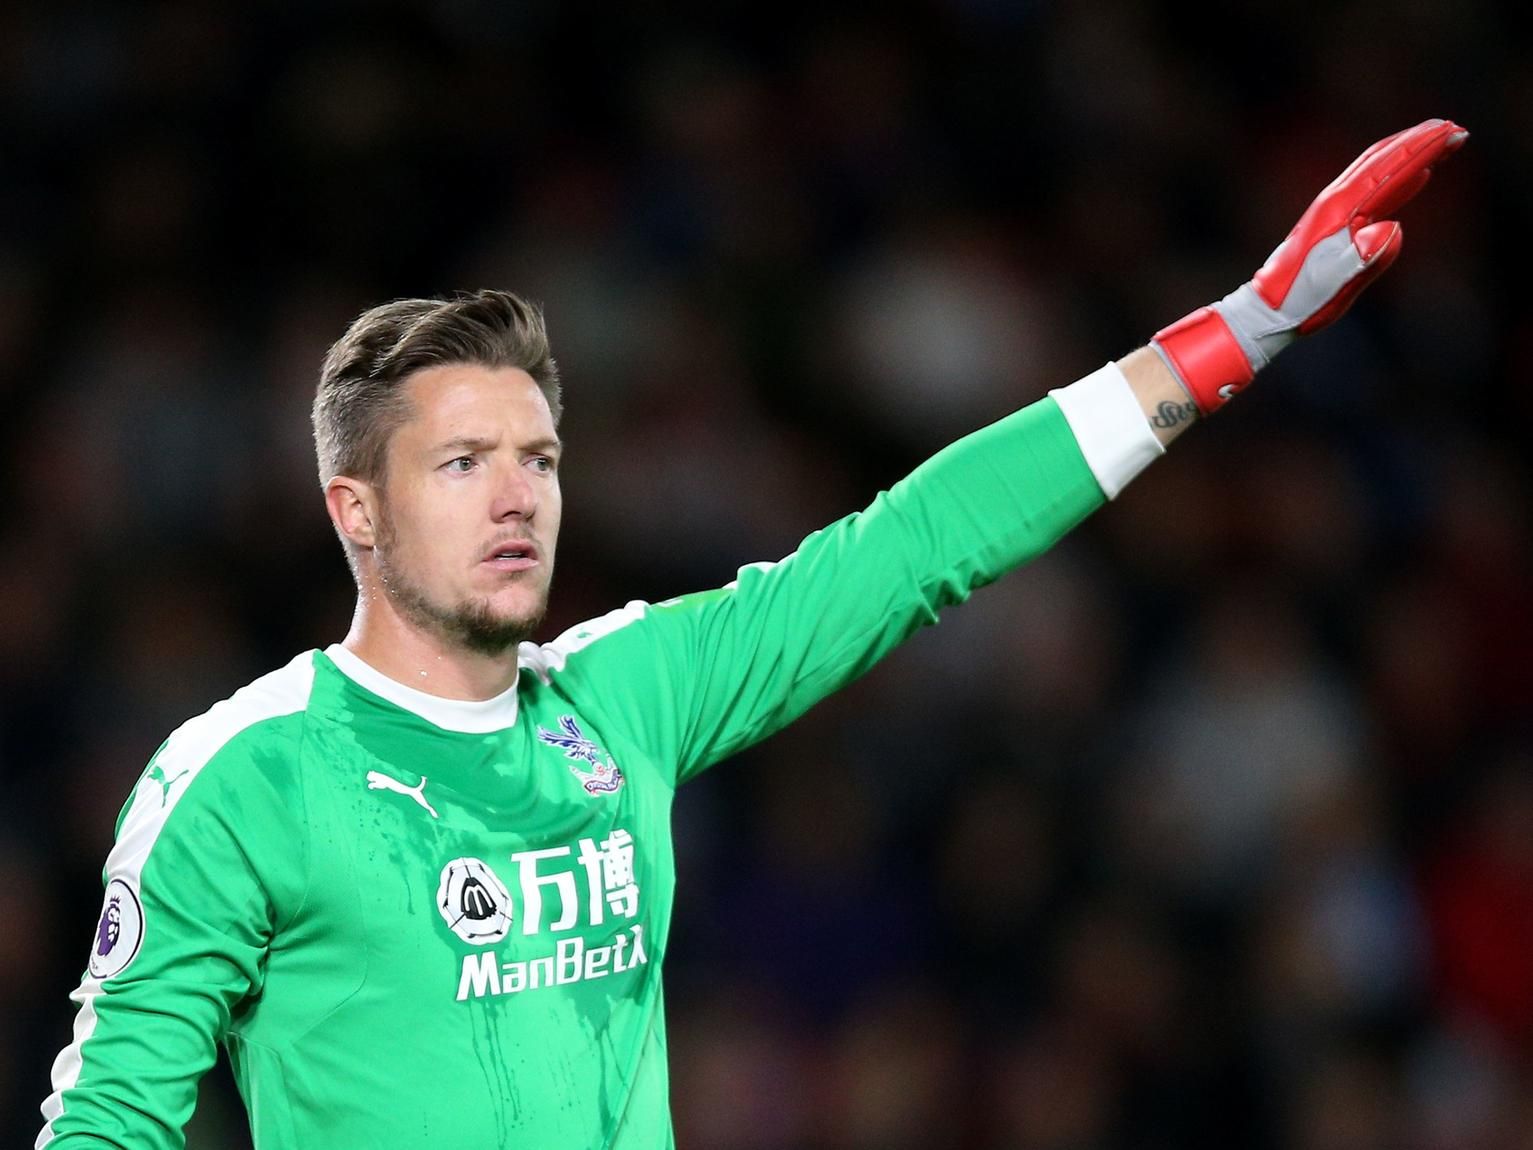 Crystal Palace goalkeeper Wayne Hennessey claimed he didn't know what a Nazi salute was as he escapes punishment from FA